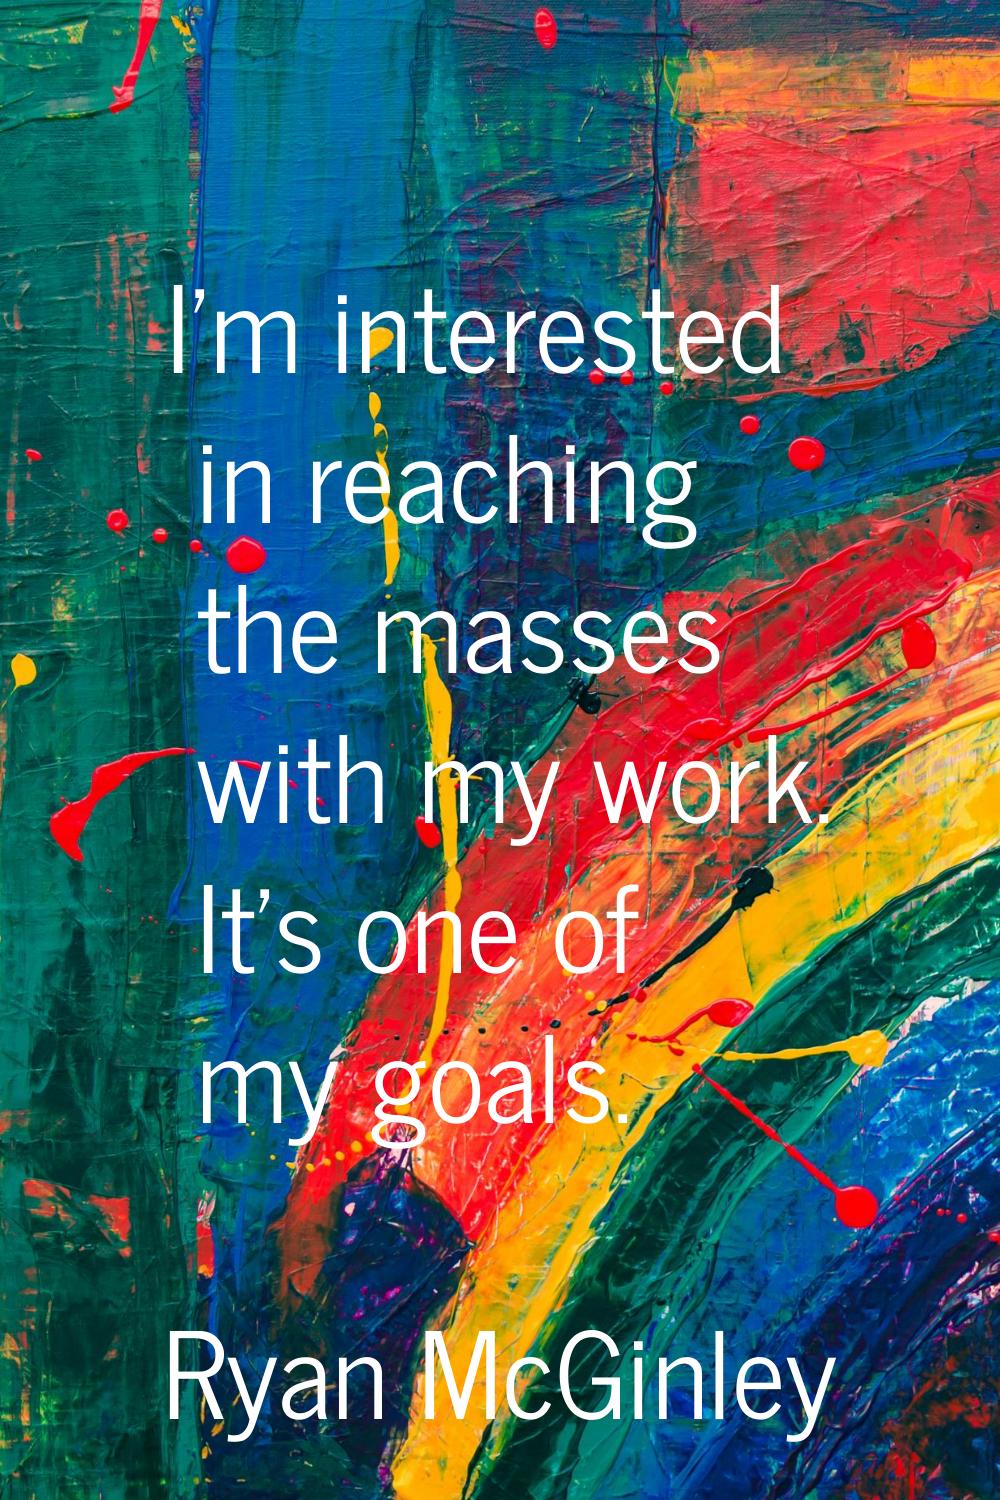 I'm interested in reaching the masses with my work. It's one of my goals.